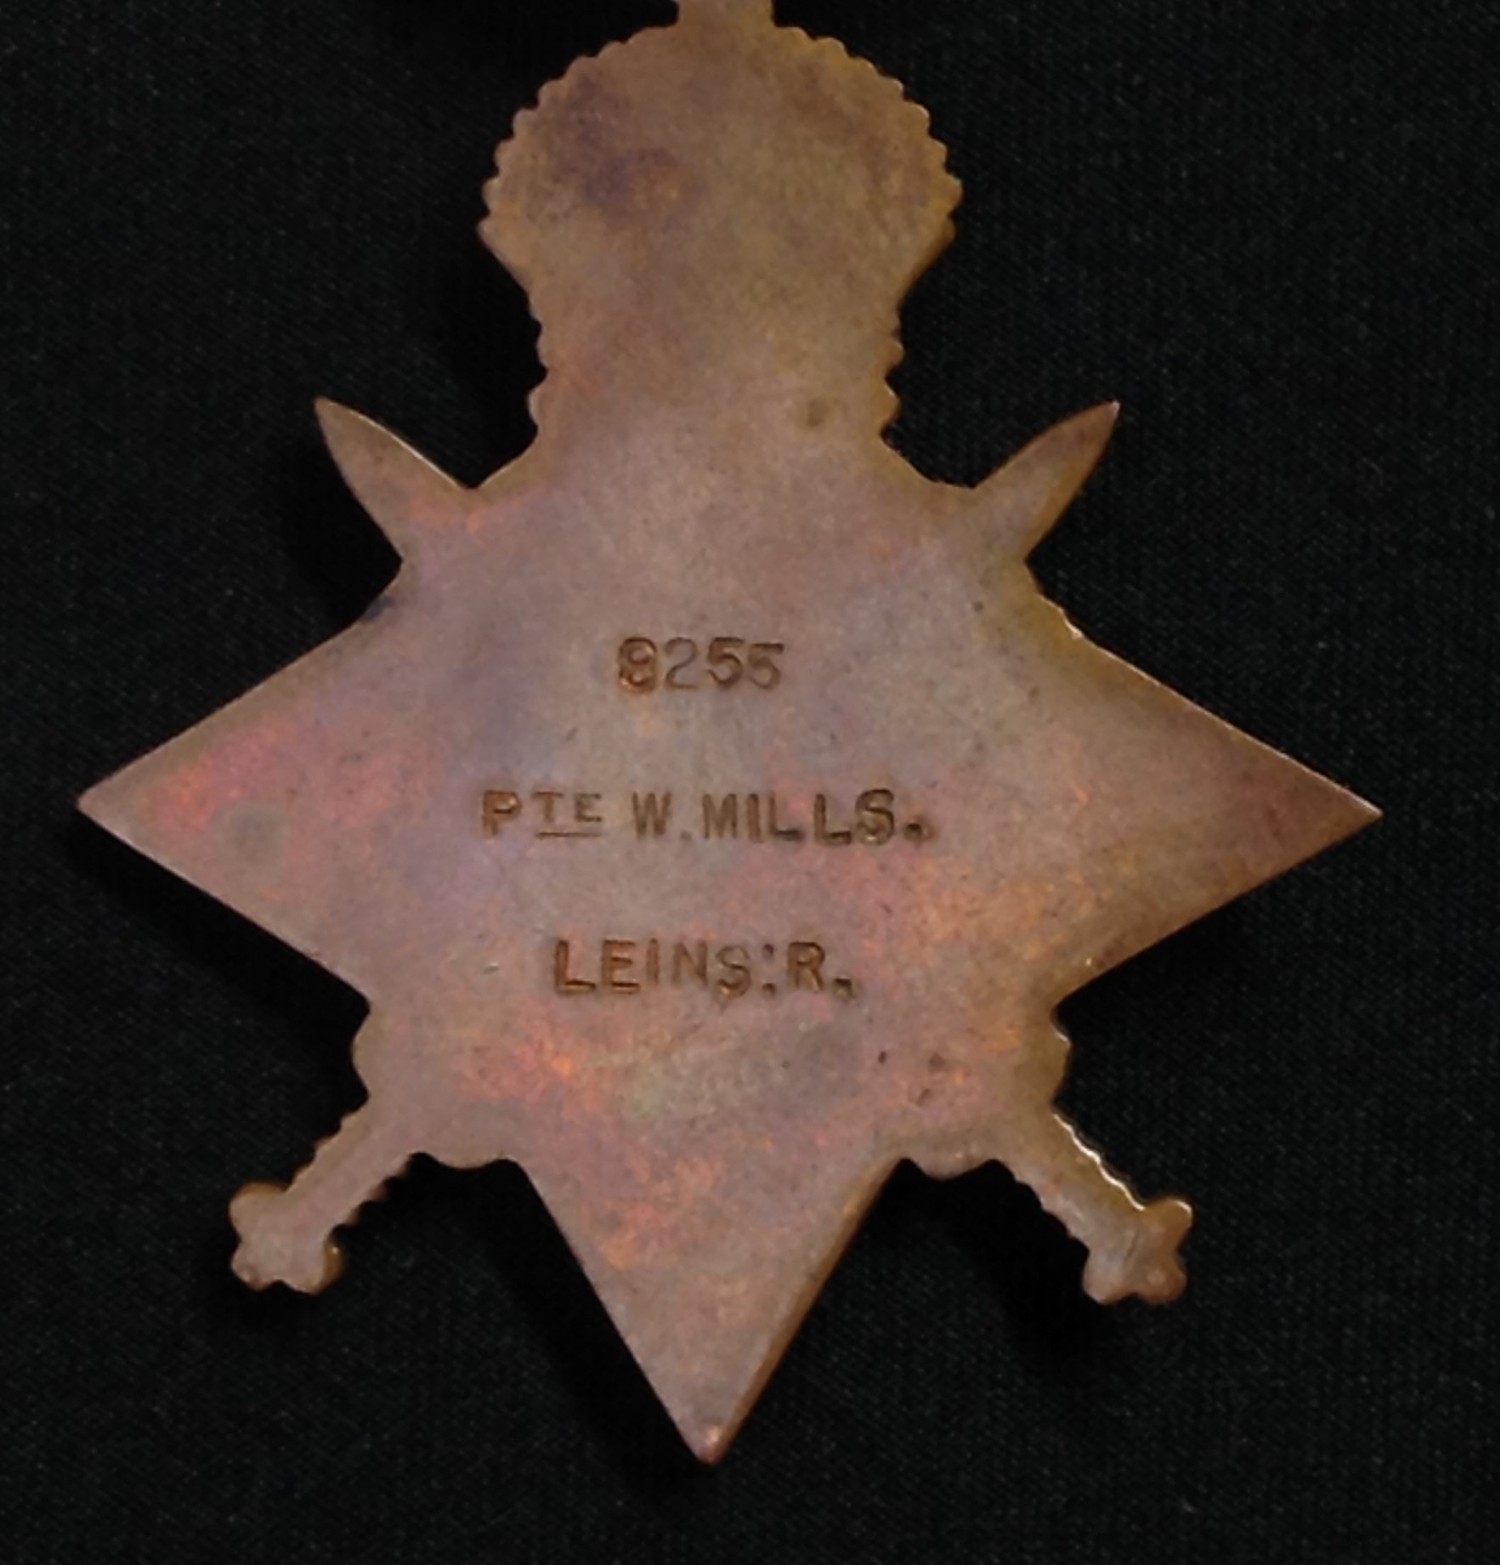 WW1 British 1914 Star, War Medal and Victory Medal & Death plaque to 8255 Pte William Mills, - Image 3 of 5